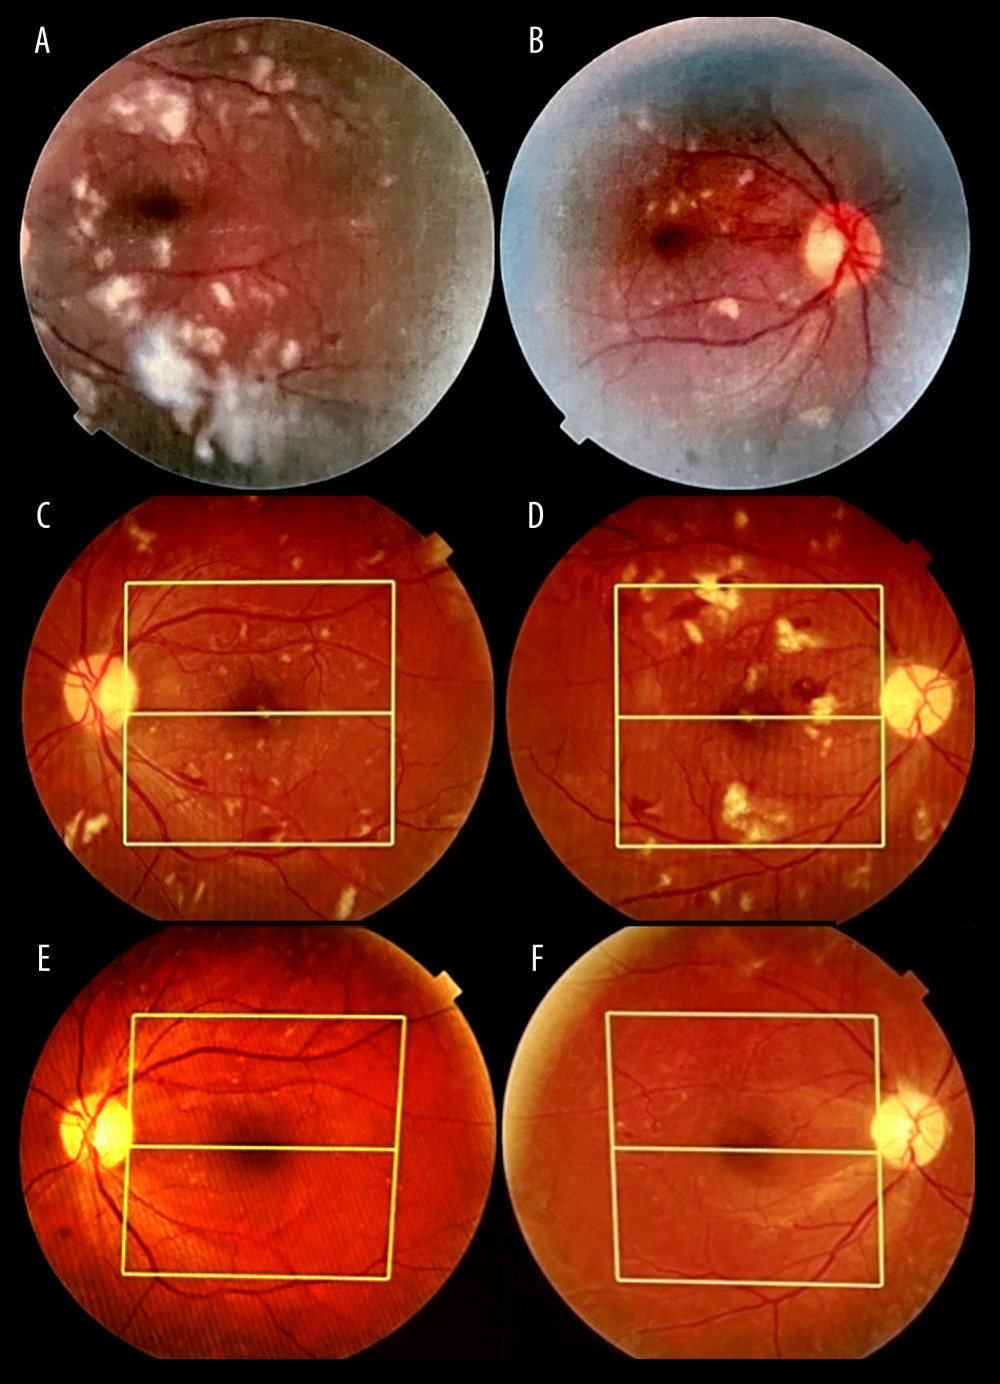 The color fundus photographs of the left (A) and right (B) eyes, showing bilateral diffuse multiple cotton-wool spots, dot and blot hemorrhage covering the posterior pole with venous congestion, and beading and cystoid macular edema (CME) in the fovea of both eyes. The left (C) and right (D) eyes, showing the fundus after 2 months, with residual cotton-wool spots, dot and blot hemorrhage, and CME. The left (E) and right (F) eyes, showing the disappearance of cotton-wool spots, dot and blot hemorrhage, with pan-retinal photocoagulation (PRP) marks after 18 months.